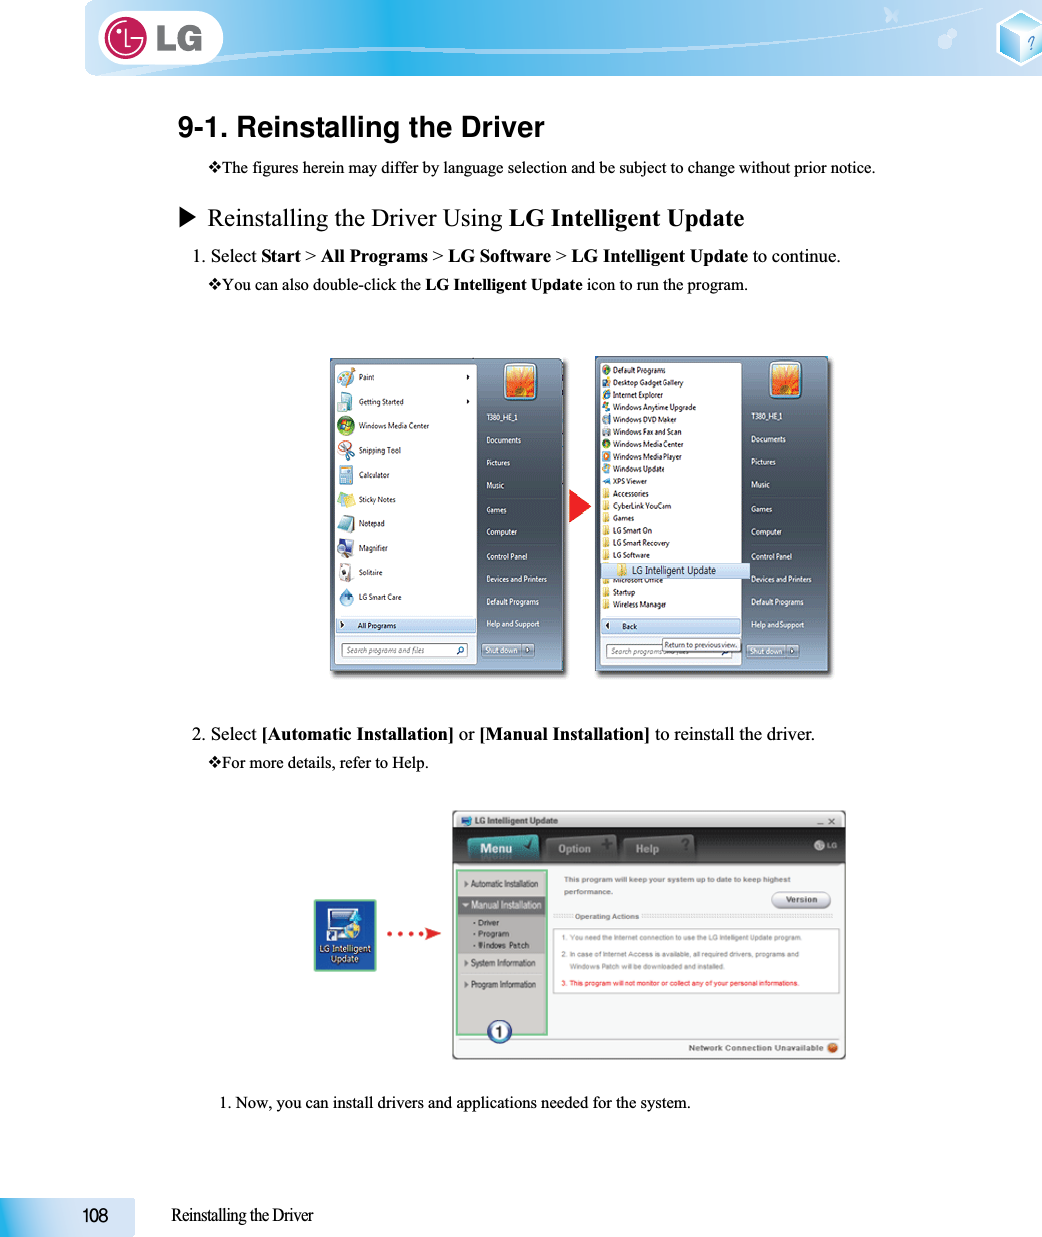 Reinstalling the Driver9-1. Reinstalling the DriverThe figures herein may differ by language selection and be subject to change without prior notice.XReinstalling the Driver Using LG Intelligent Update1. Select Start &gt; All Programs &gt; LG Software &gt; LG Intelligent Update to continue.You can also double-click the LG Intelligent Update icon to run the program.2. Select [Automatic Installation] or [Manual Installation] to reinstall the driver.For more details, refer to Help.1. Now, you can install drivers and applications needed for the system.